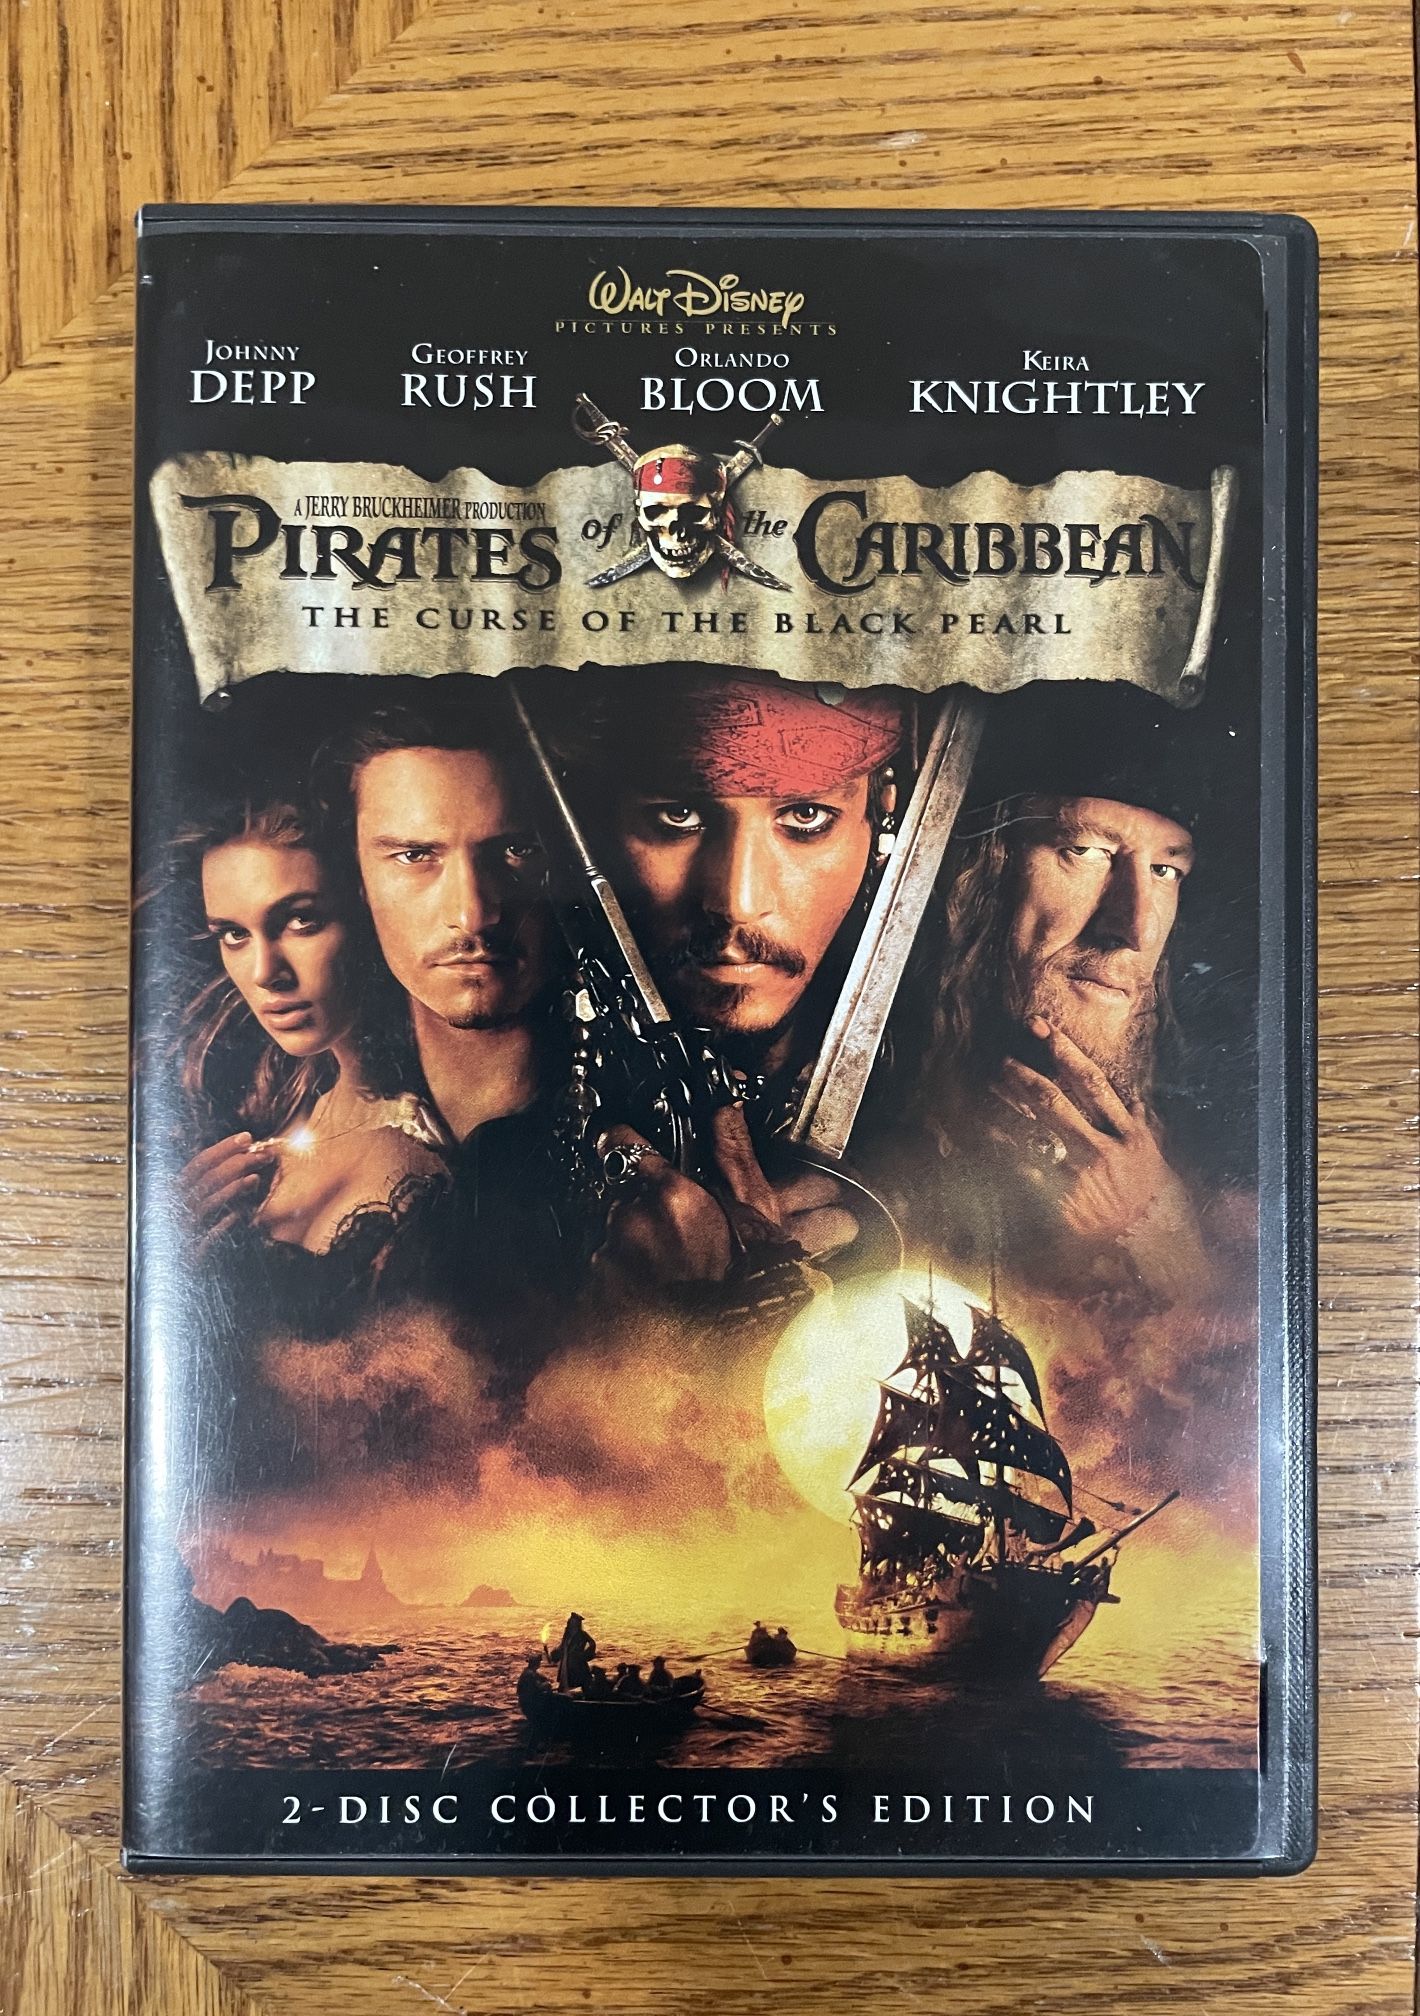 PIRATES OF THE CARIBBEAN - THE CURSE OF THE BLACK PEARL